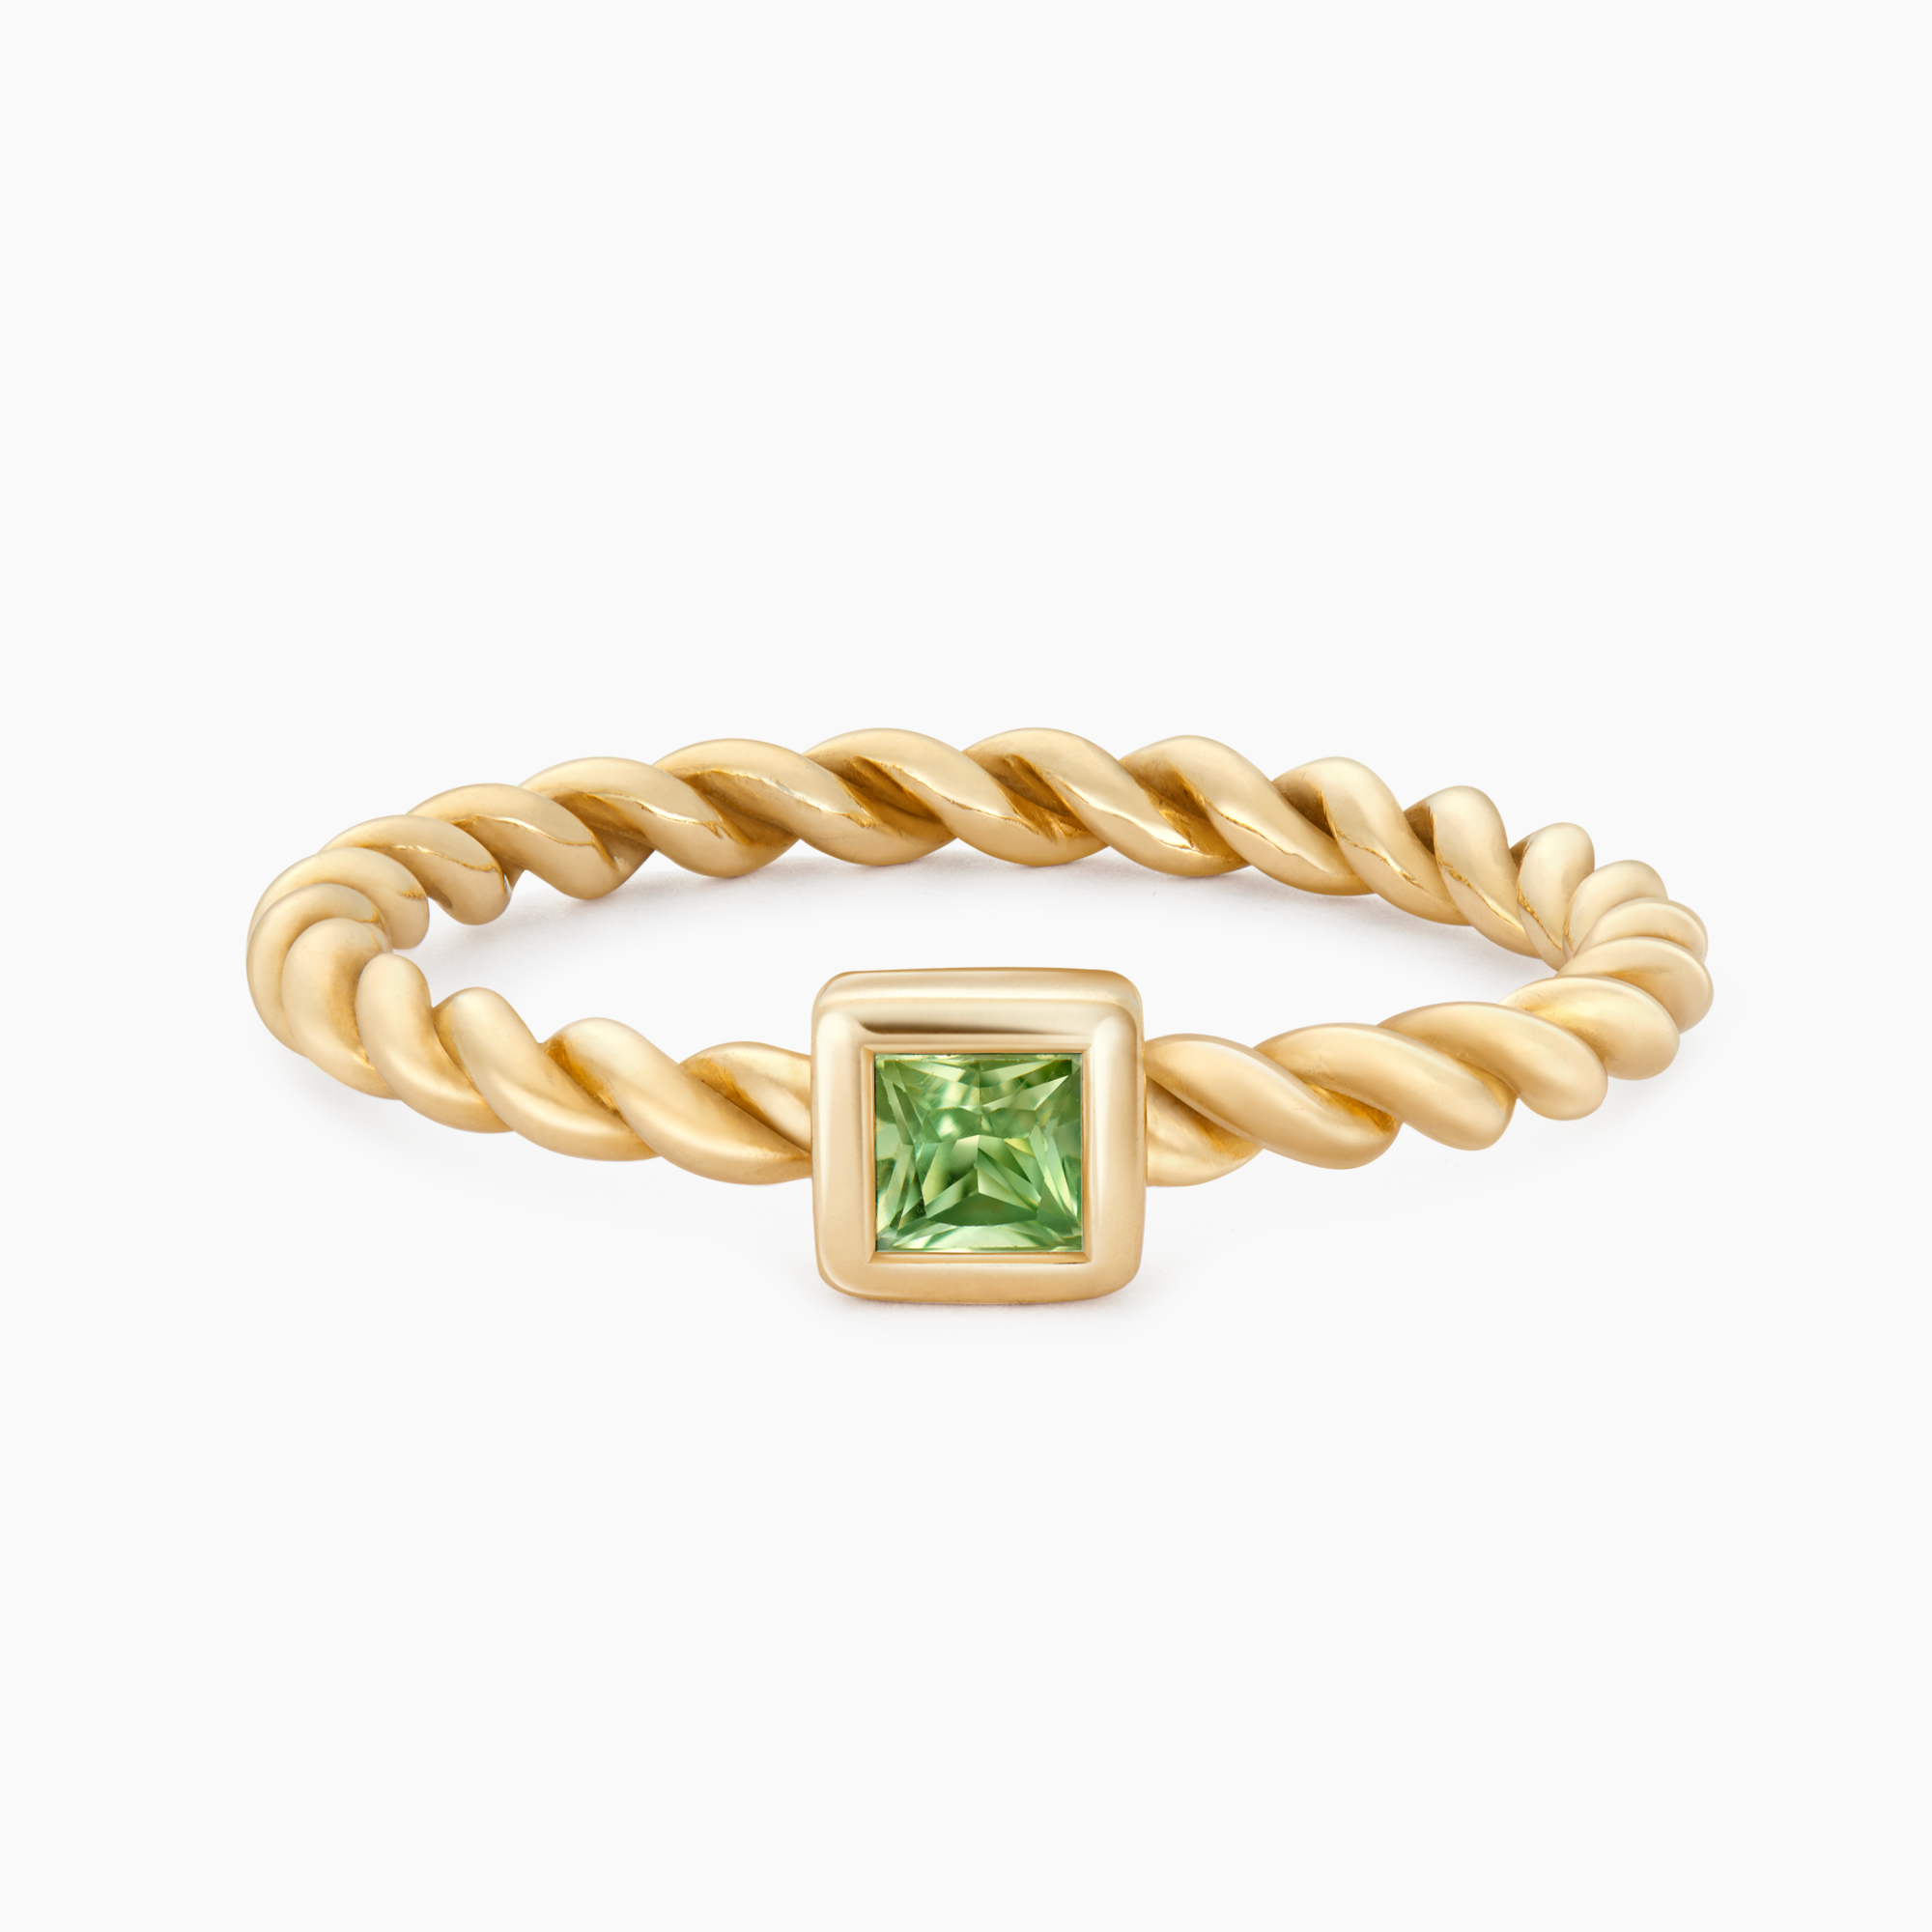 Solid Gold Ring with a Twist